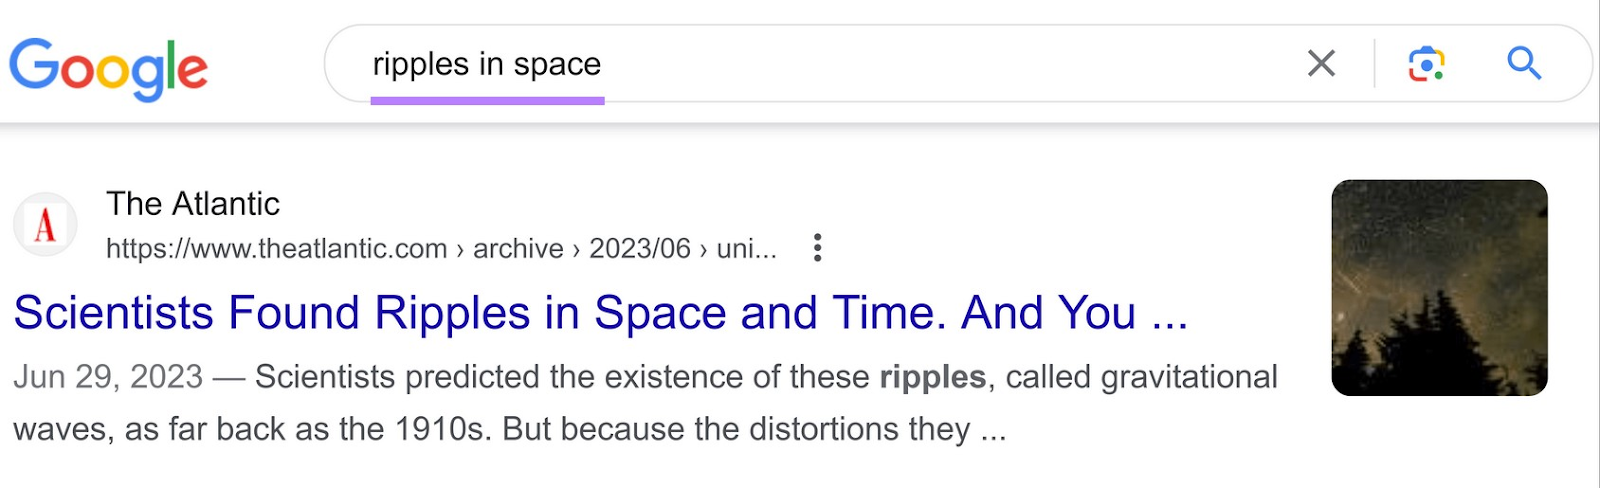 an article from The Atlantic is the first results in Google SERP for “ripples in space” query